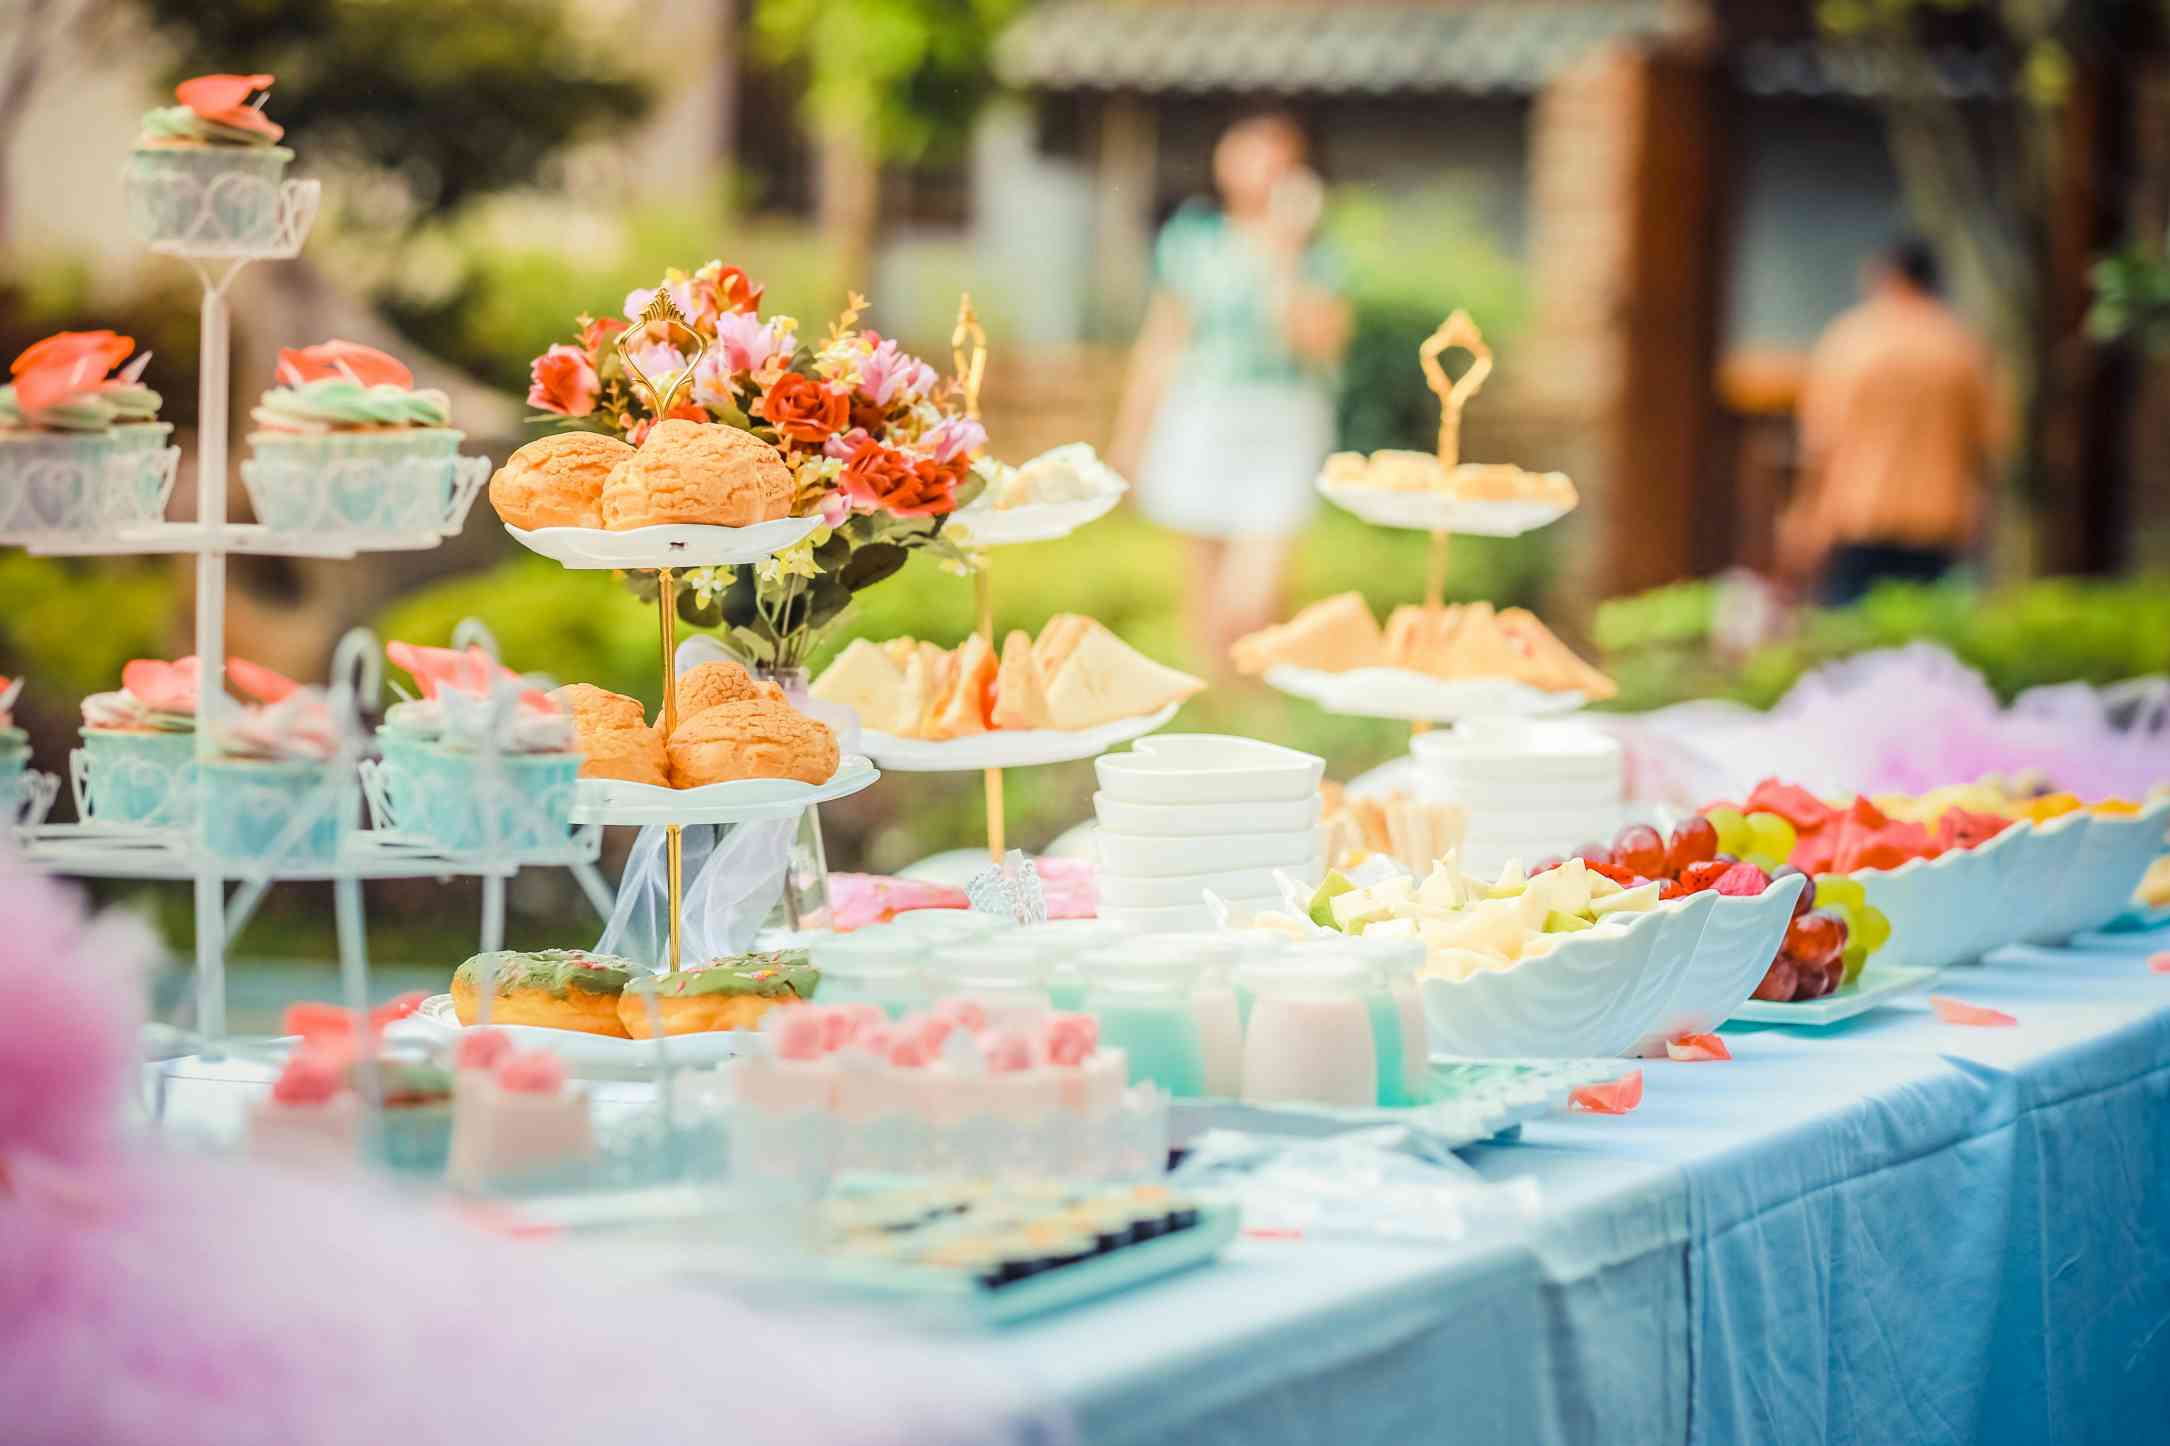 Ways to Serve Food During Your Wedding